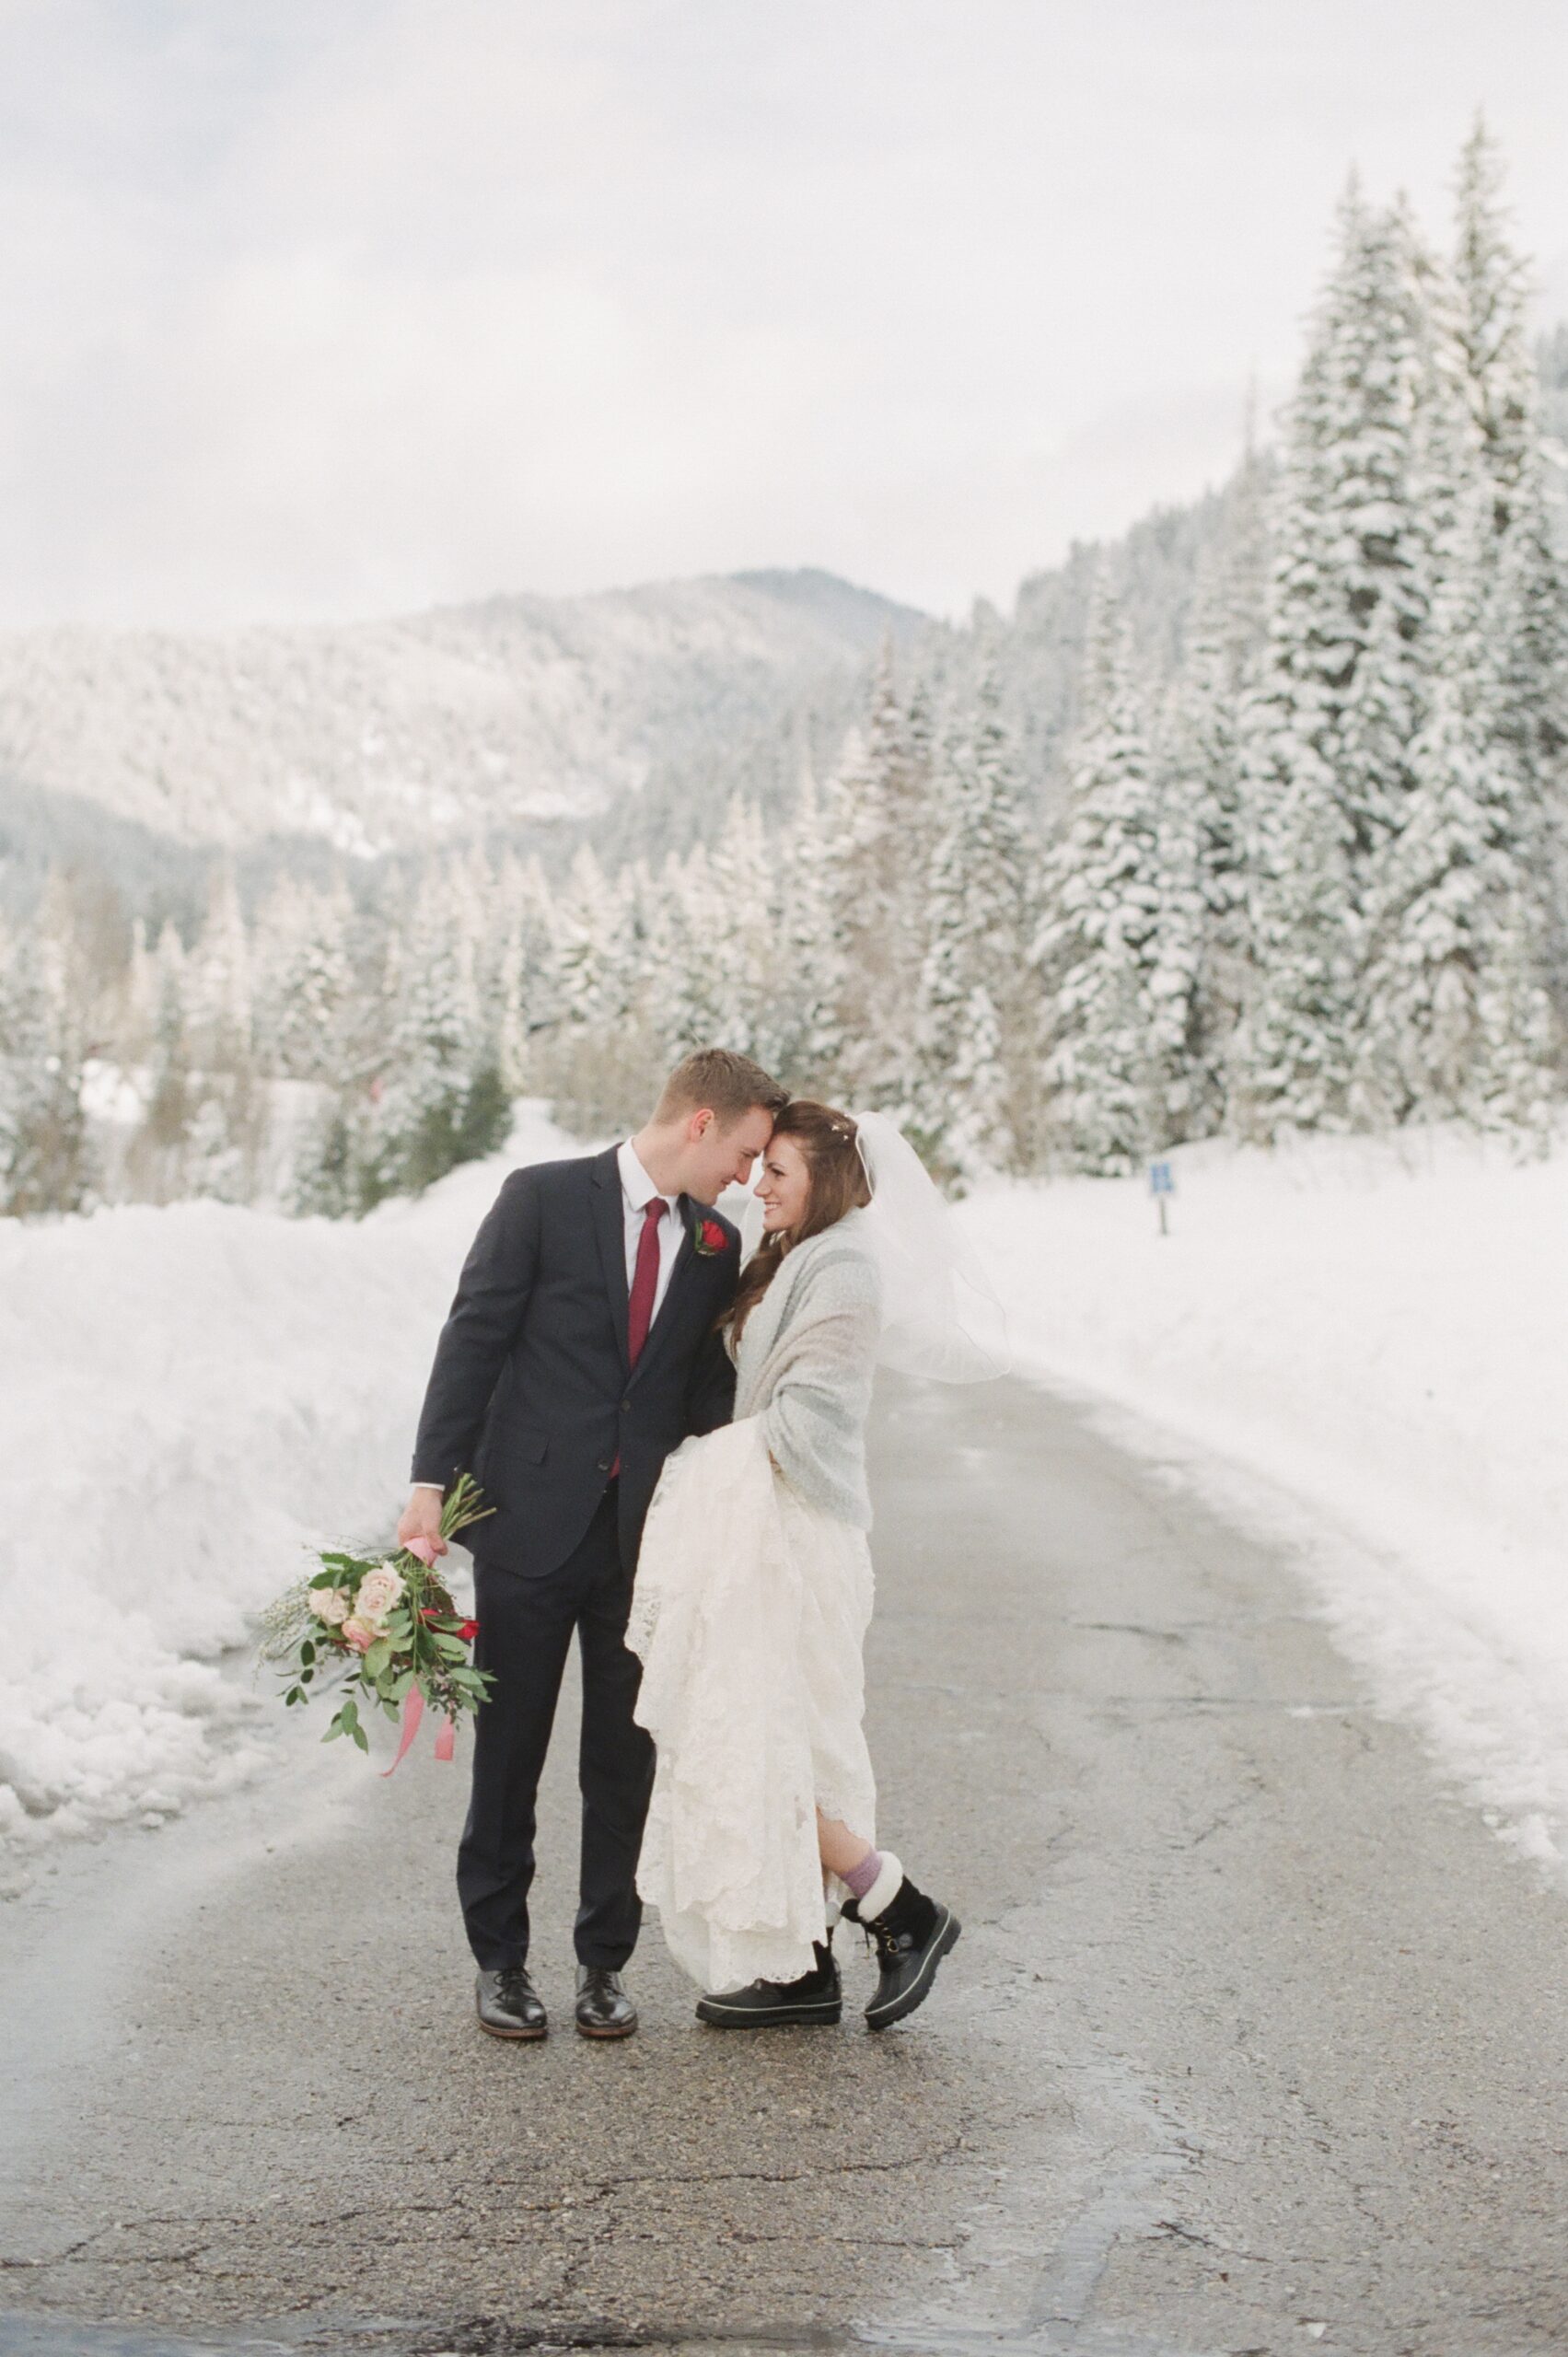 Utah winter photographer tips for bridals in the snow. Bride in snow boots and shawl